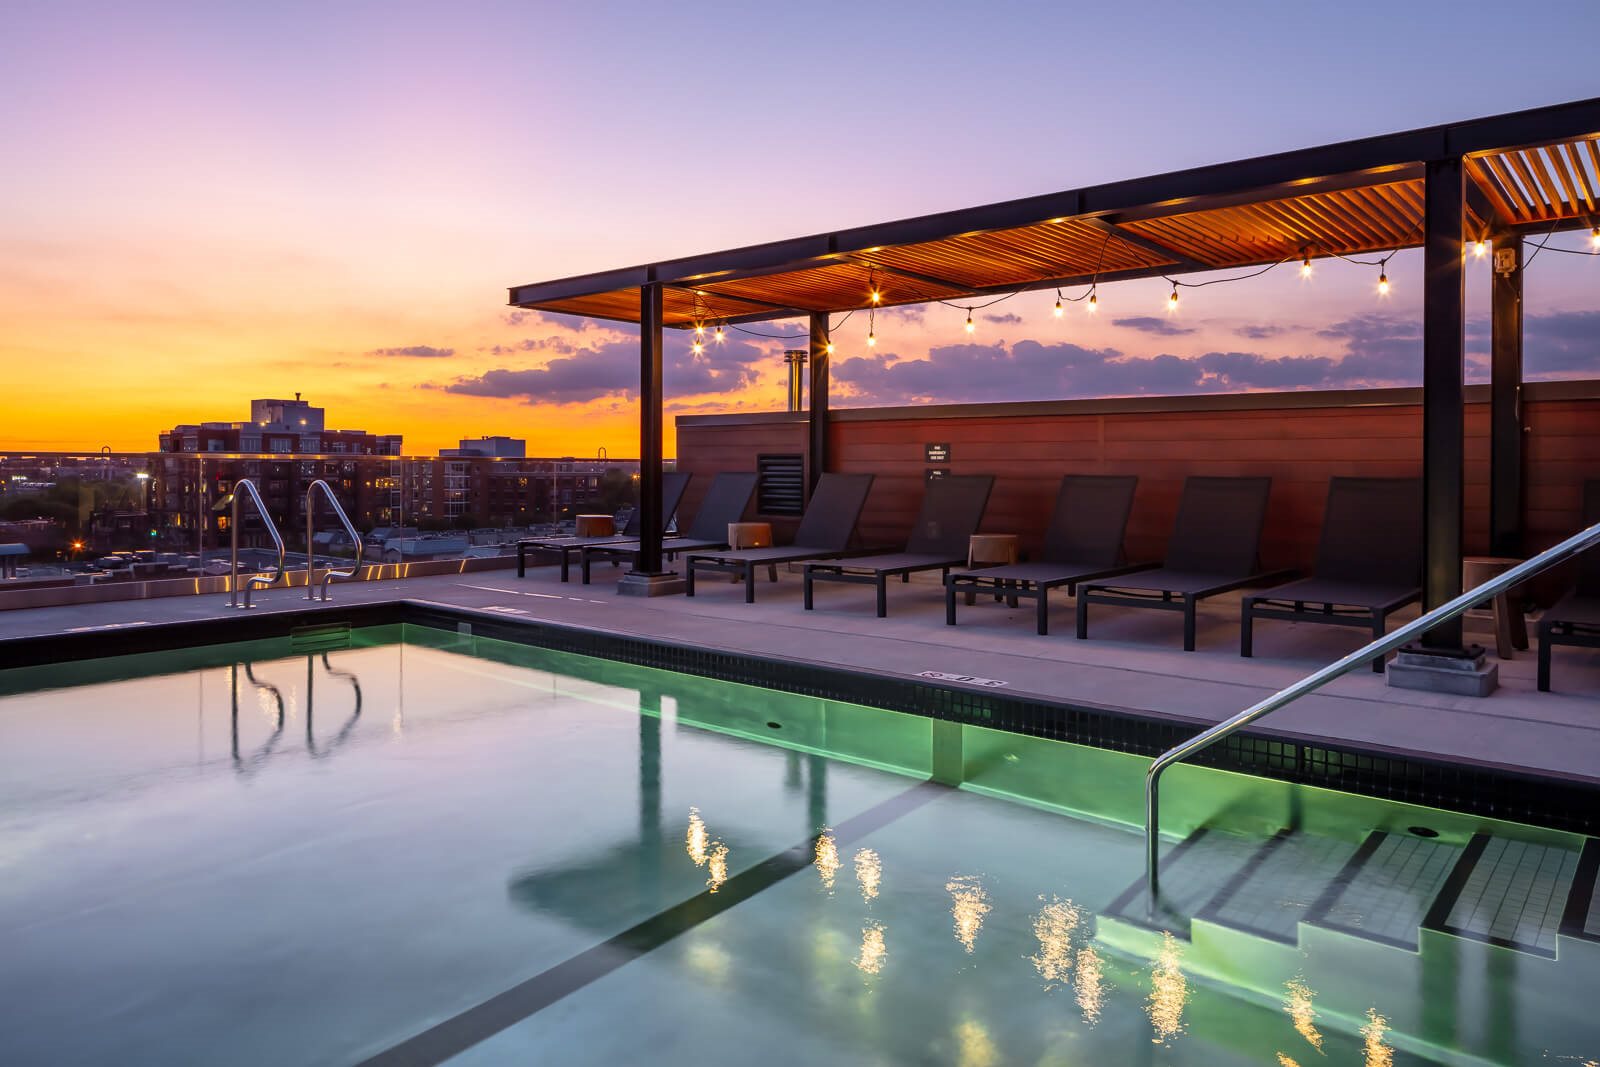 Pool on rooftop with lounge seating under pergola